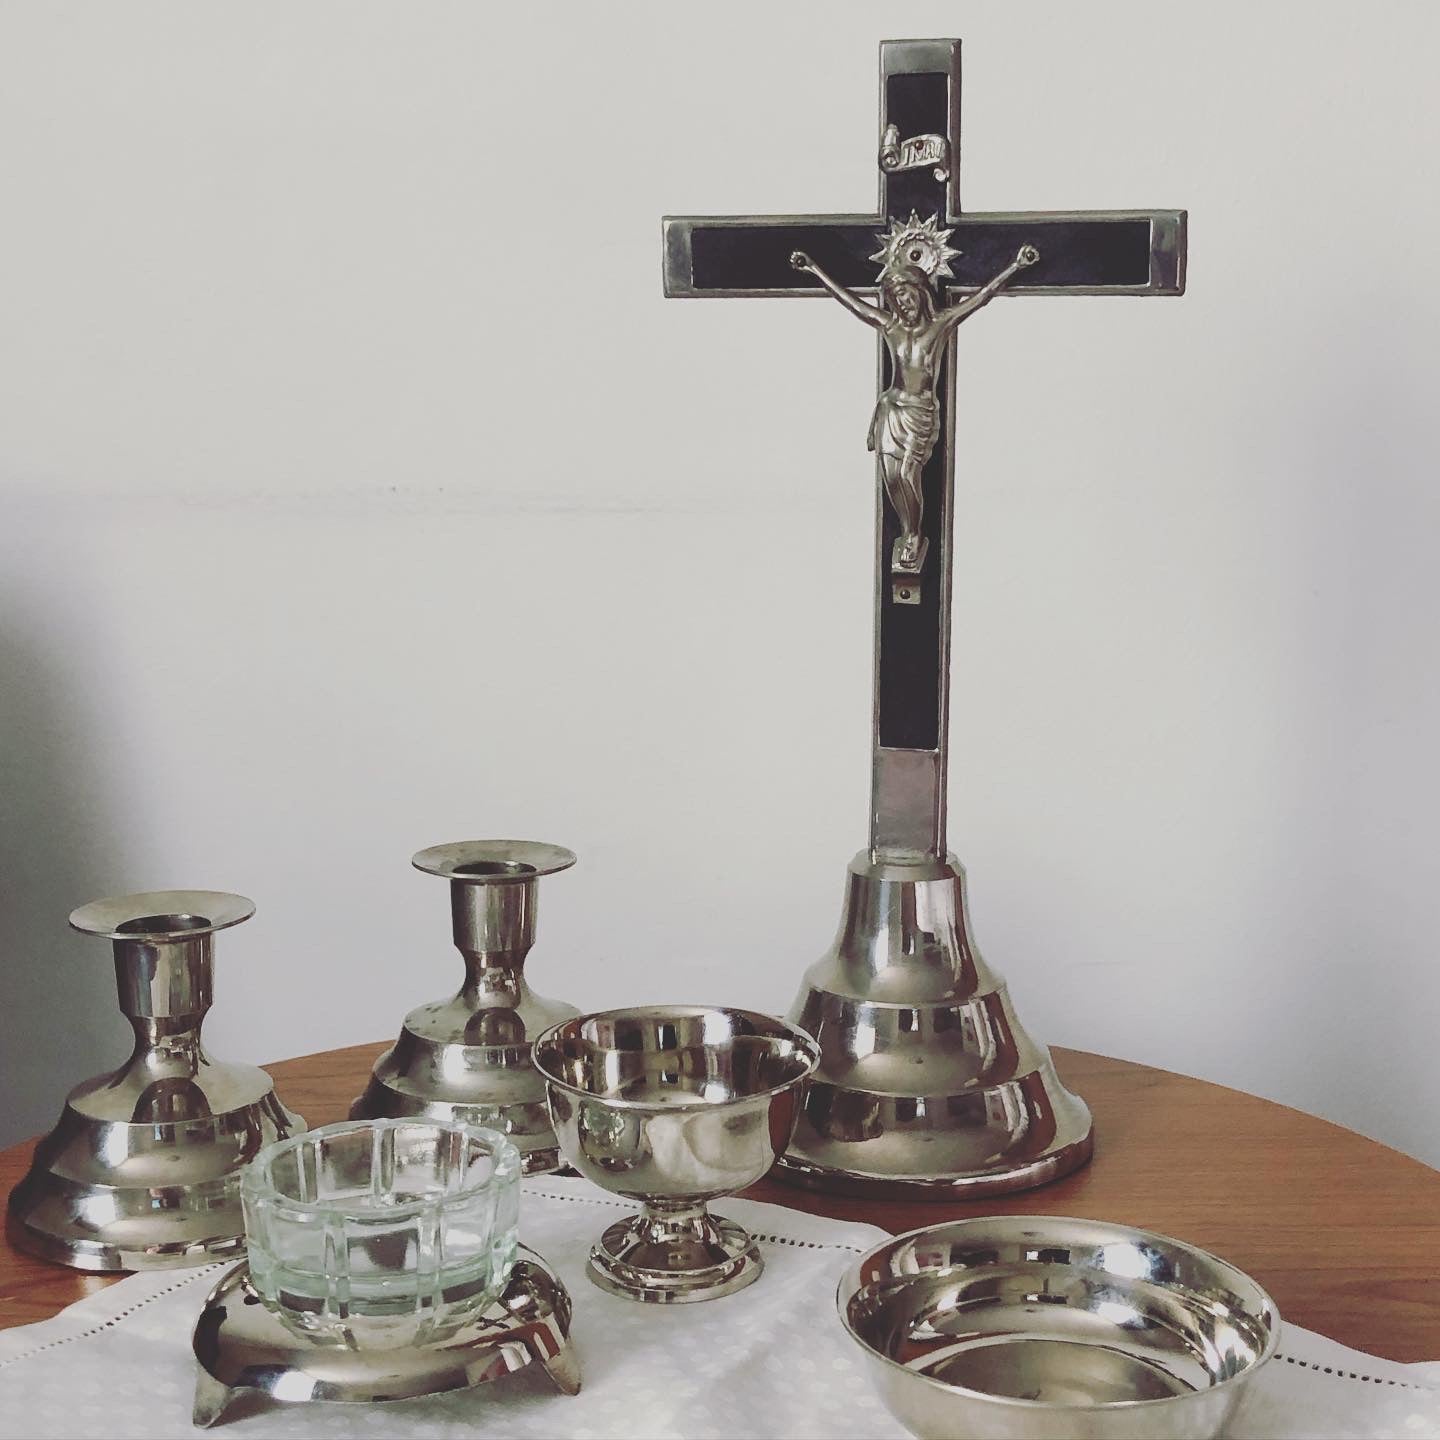 Religious Last Rites Silver Dishes | Vintage Tea Lights Candle Holder